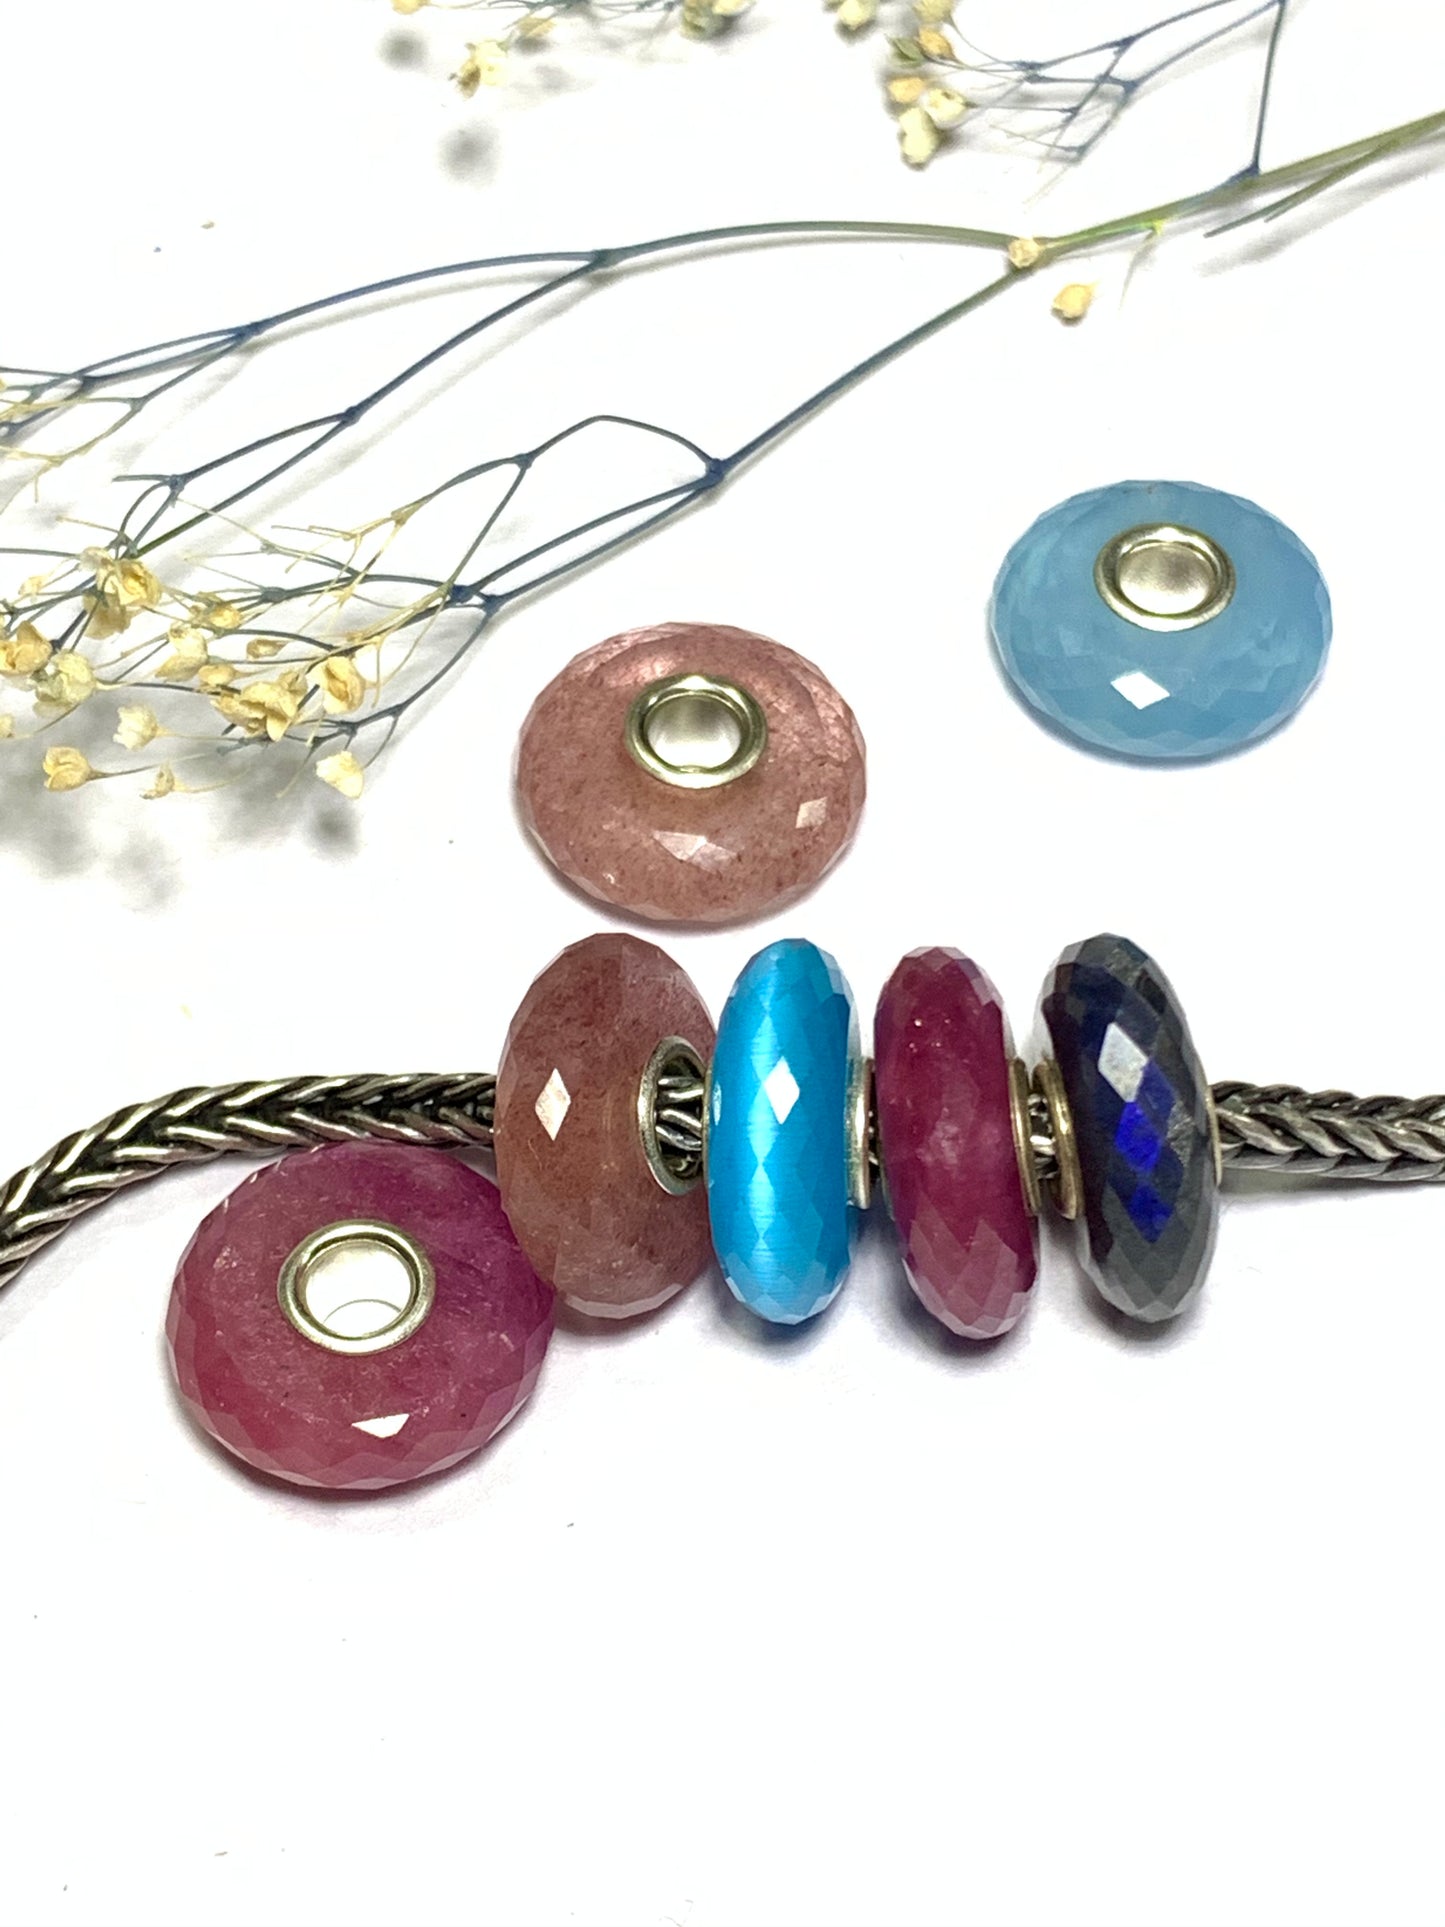 Gemstone or Glass Beads with Silver Core from Ampearlbeads Live Streaming